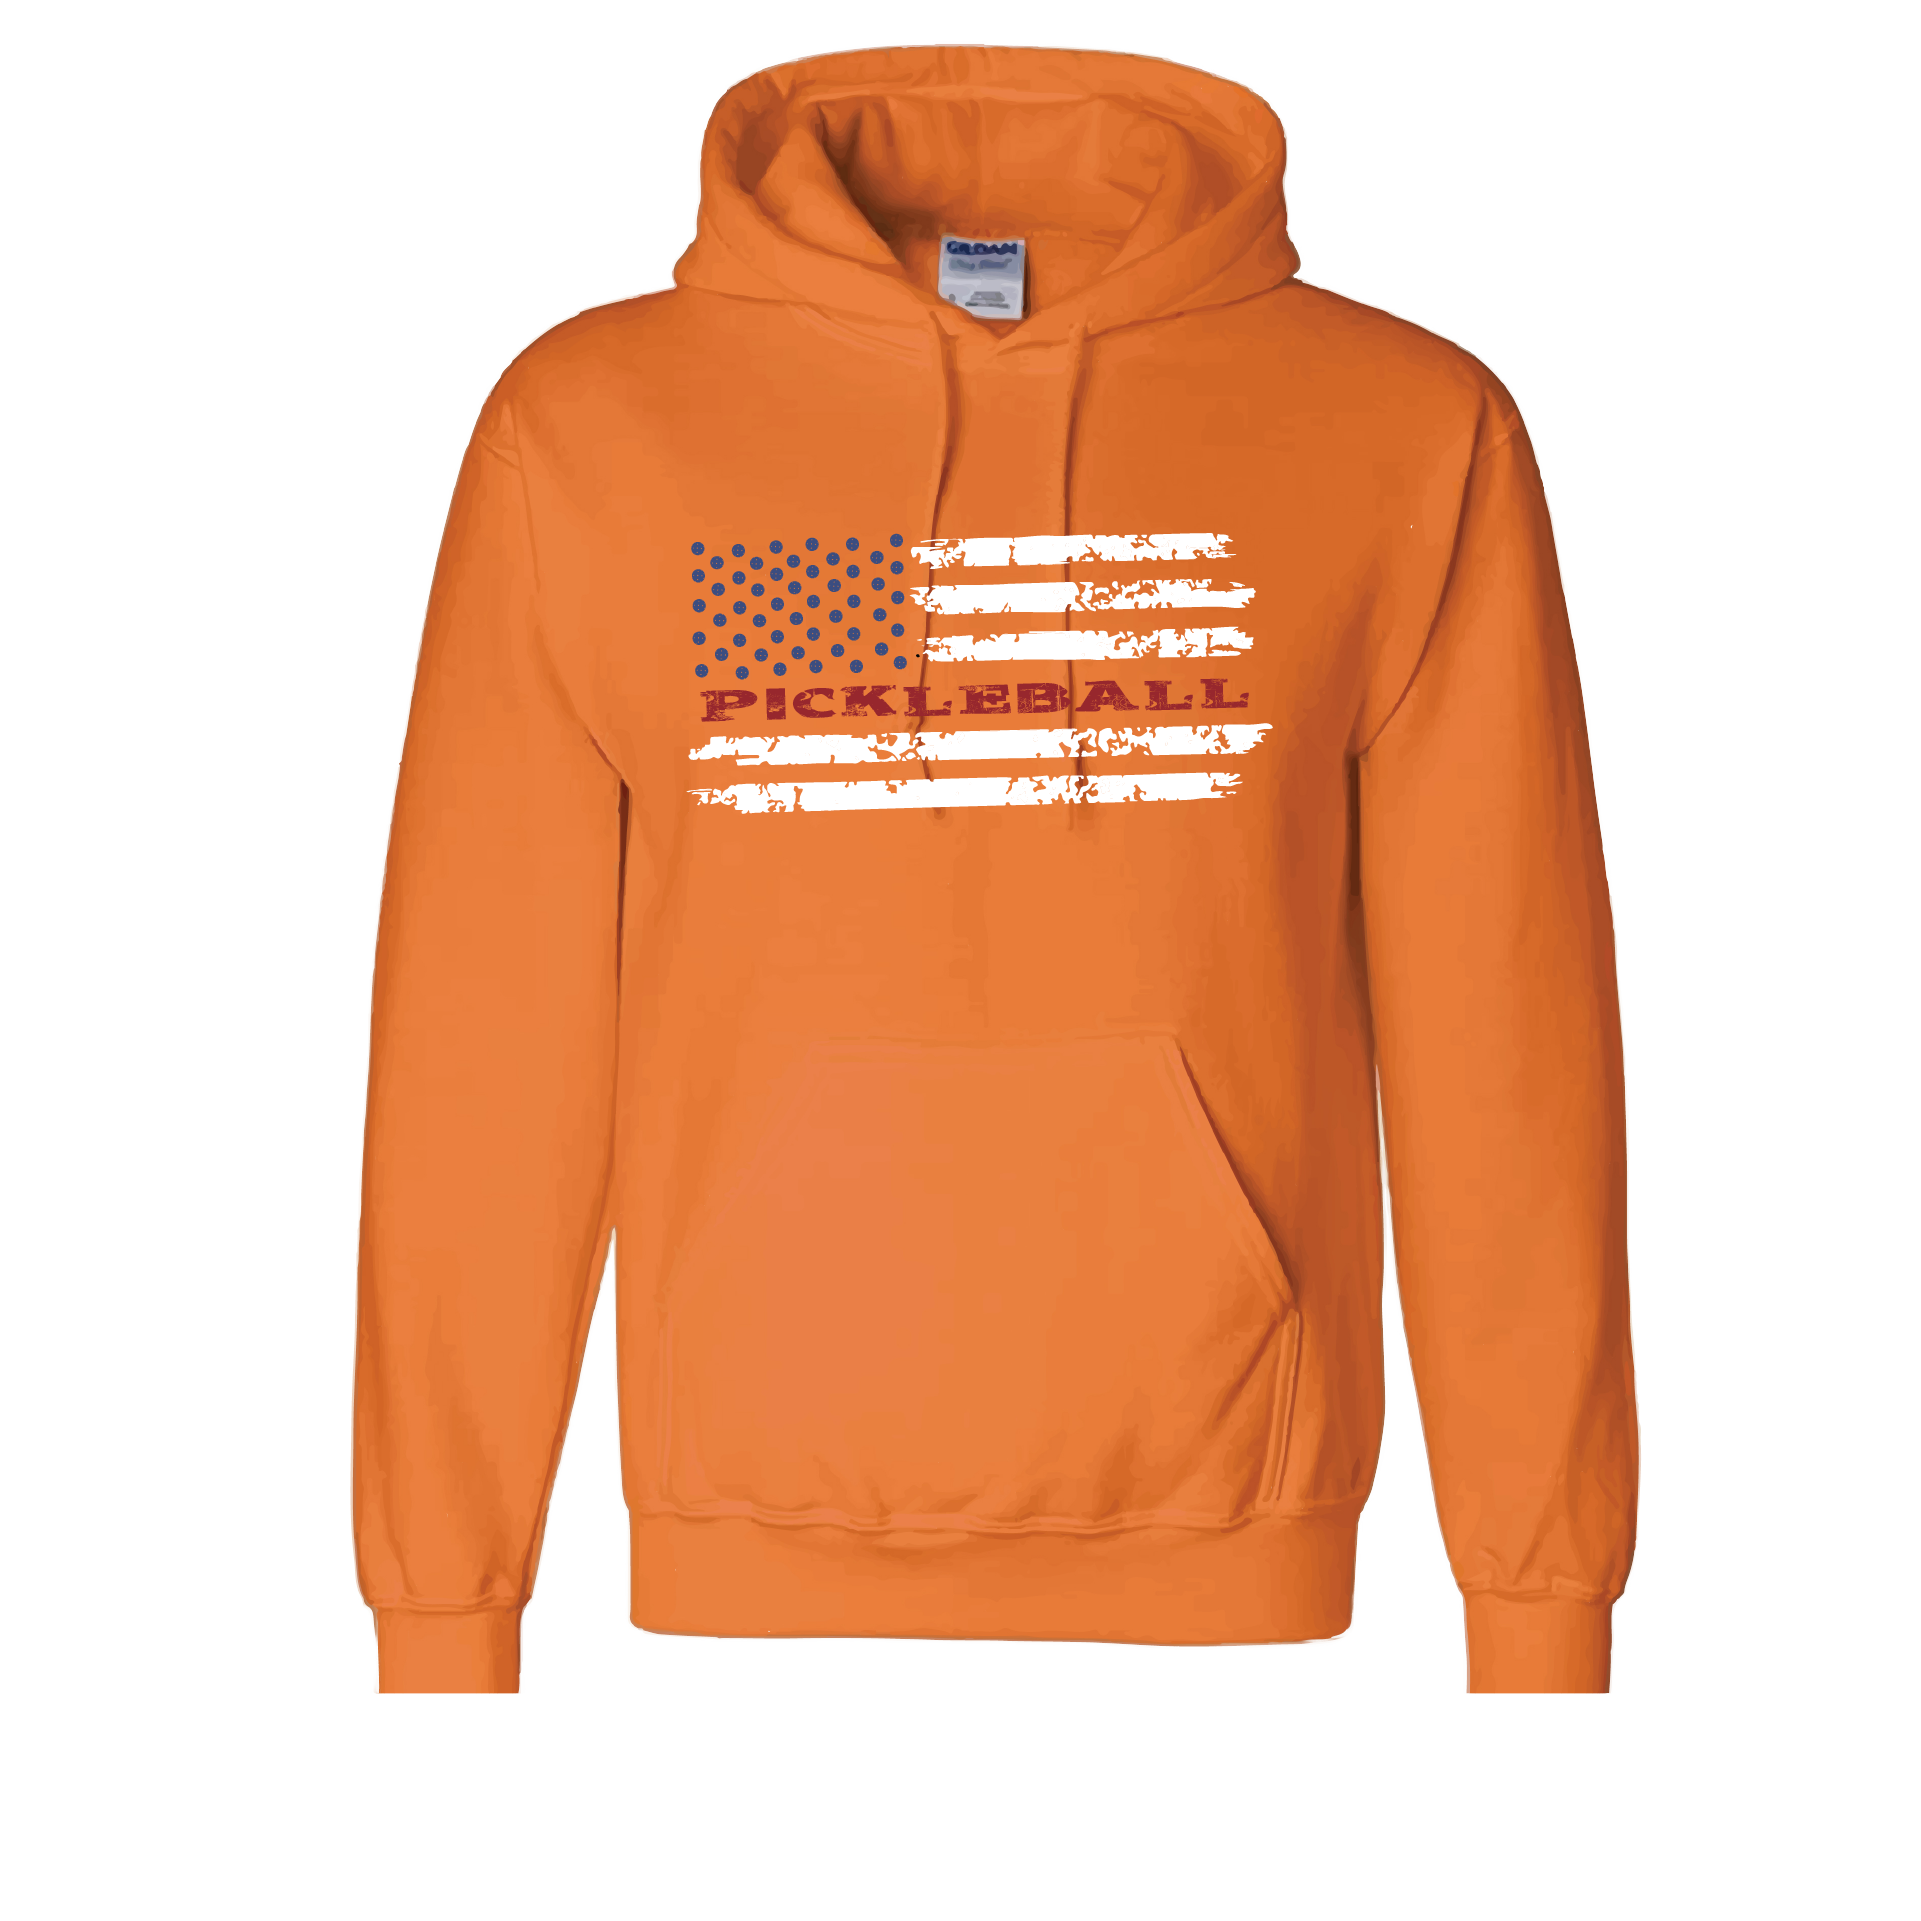 Design: Pickleball Flag Horizontal or Vertial  Unisex Hooded Sweatshirt: Moisture-wicking, double-lined hood, front pouch pocket.  This unisex hooded sweatshirt is ultra comfortable and soft. Stay warm on the Pickleball courts while being that hit with this one of kind 